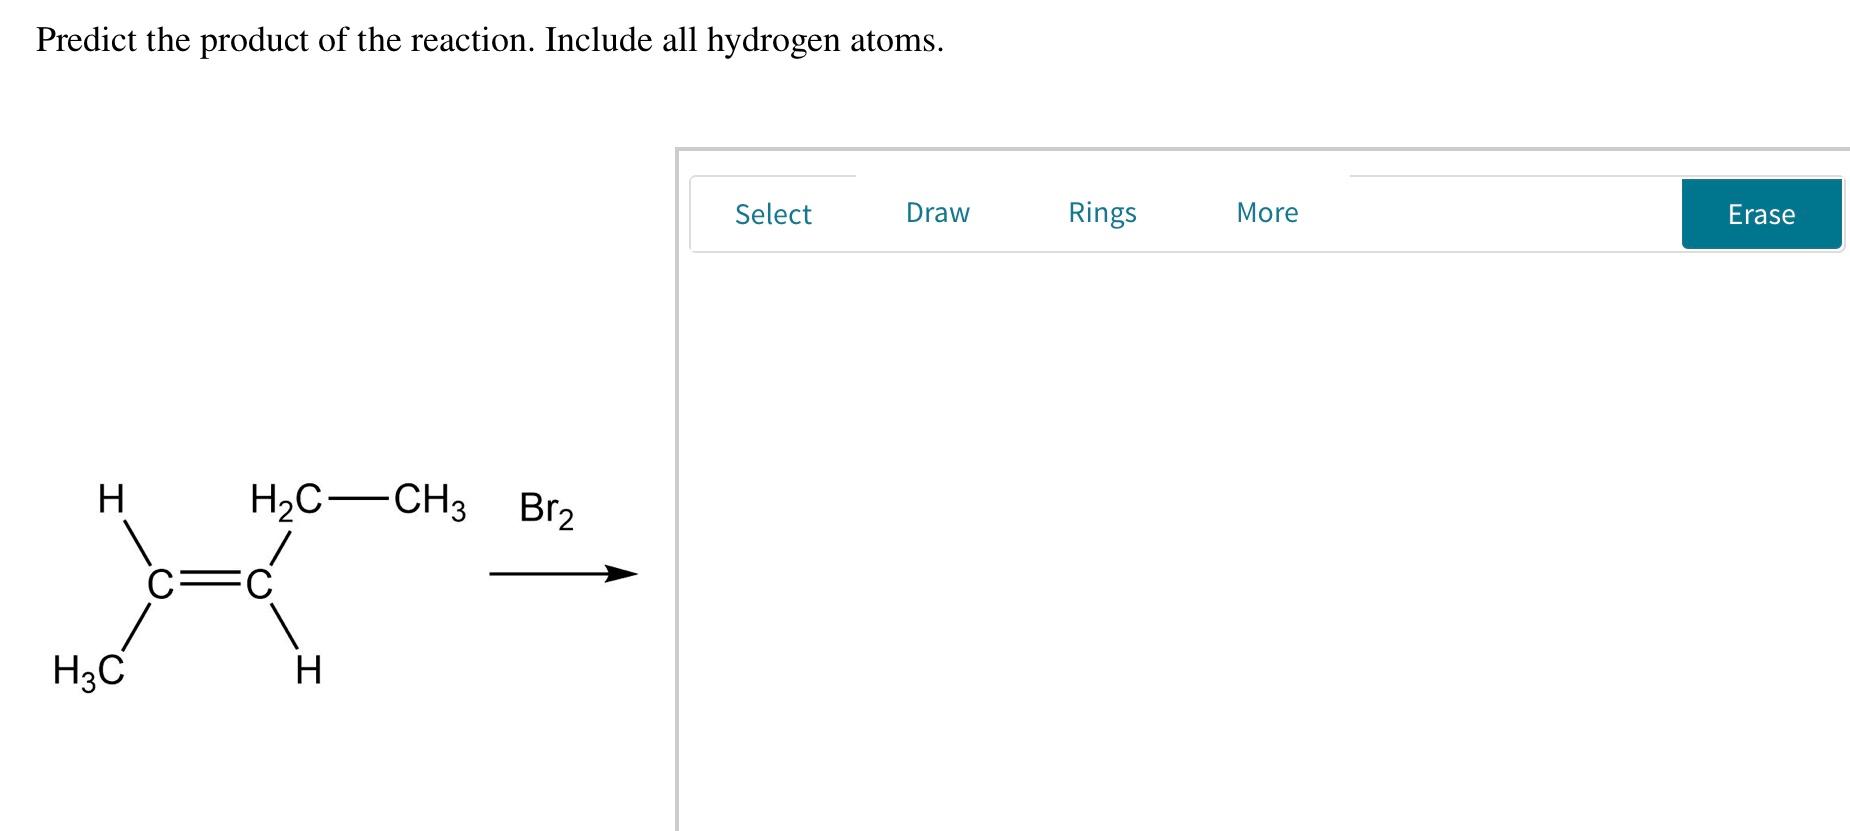 Predict the product of the reaction. Include all hydrogen atoms.
Select
Draw
Rings
More
Erase
H
H,C-CH3 Br2
С
H3C
H